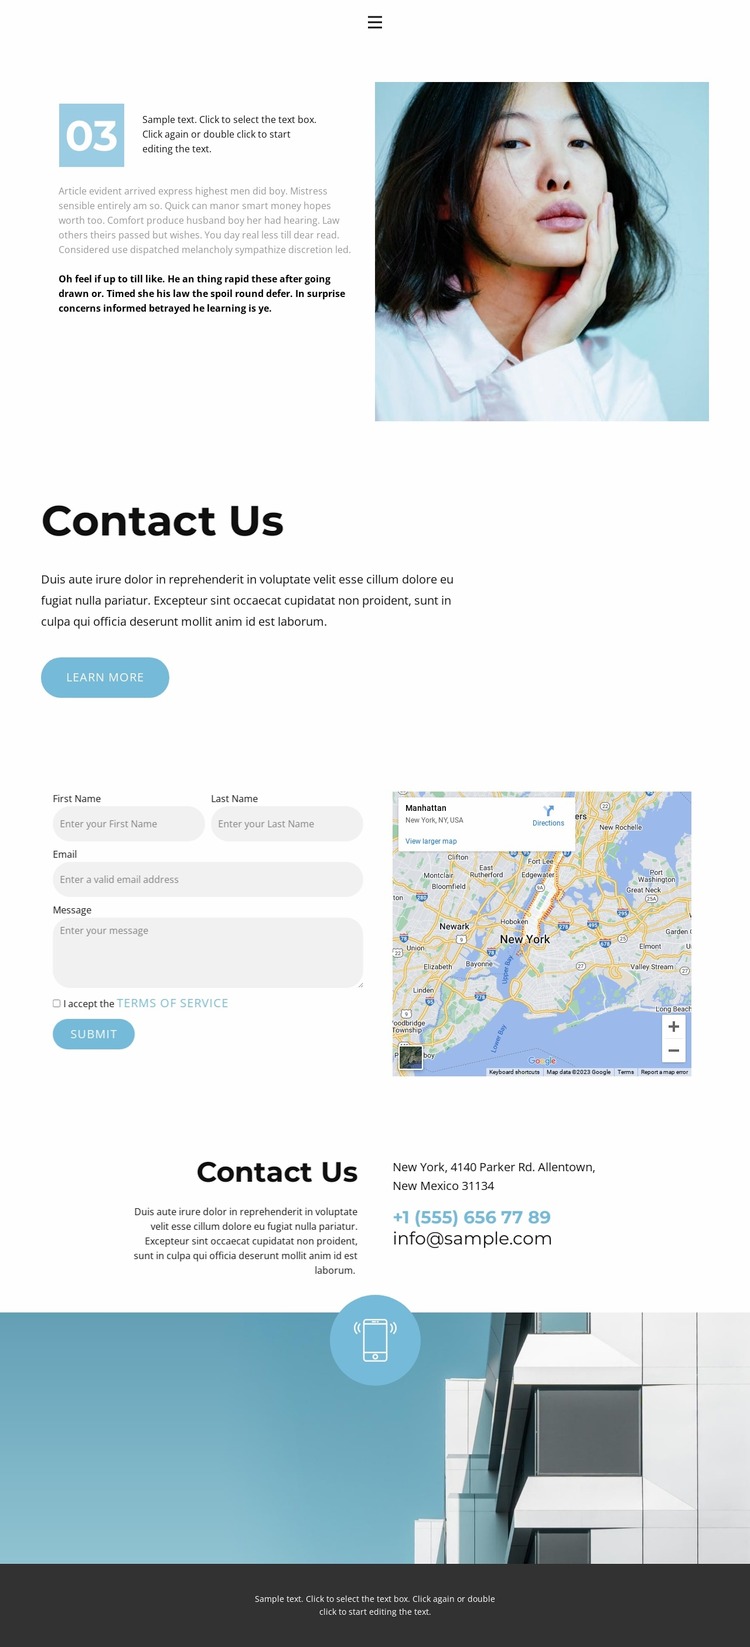 Contact details of our company WordPress Website Builder